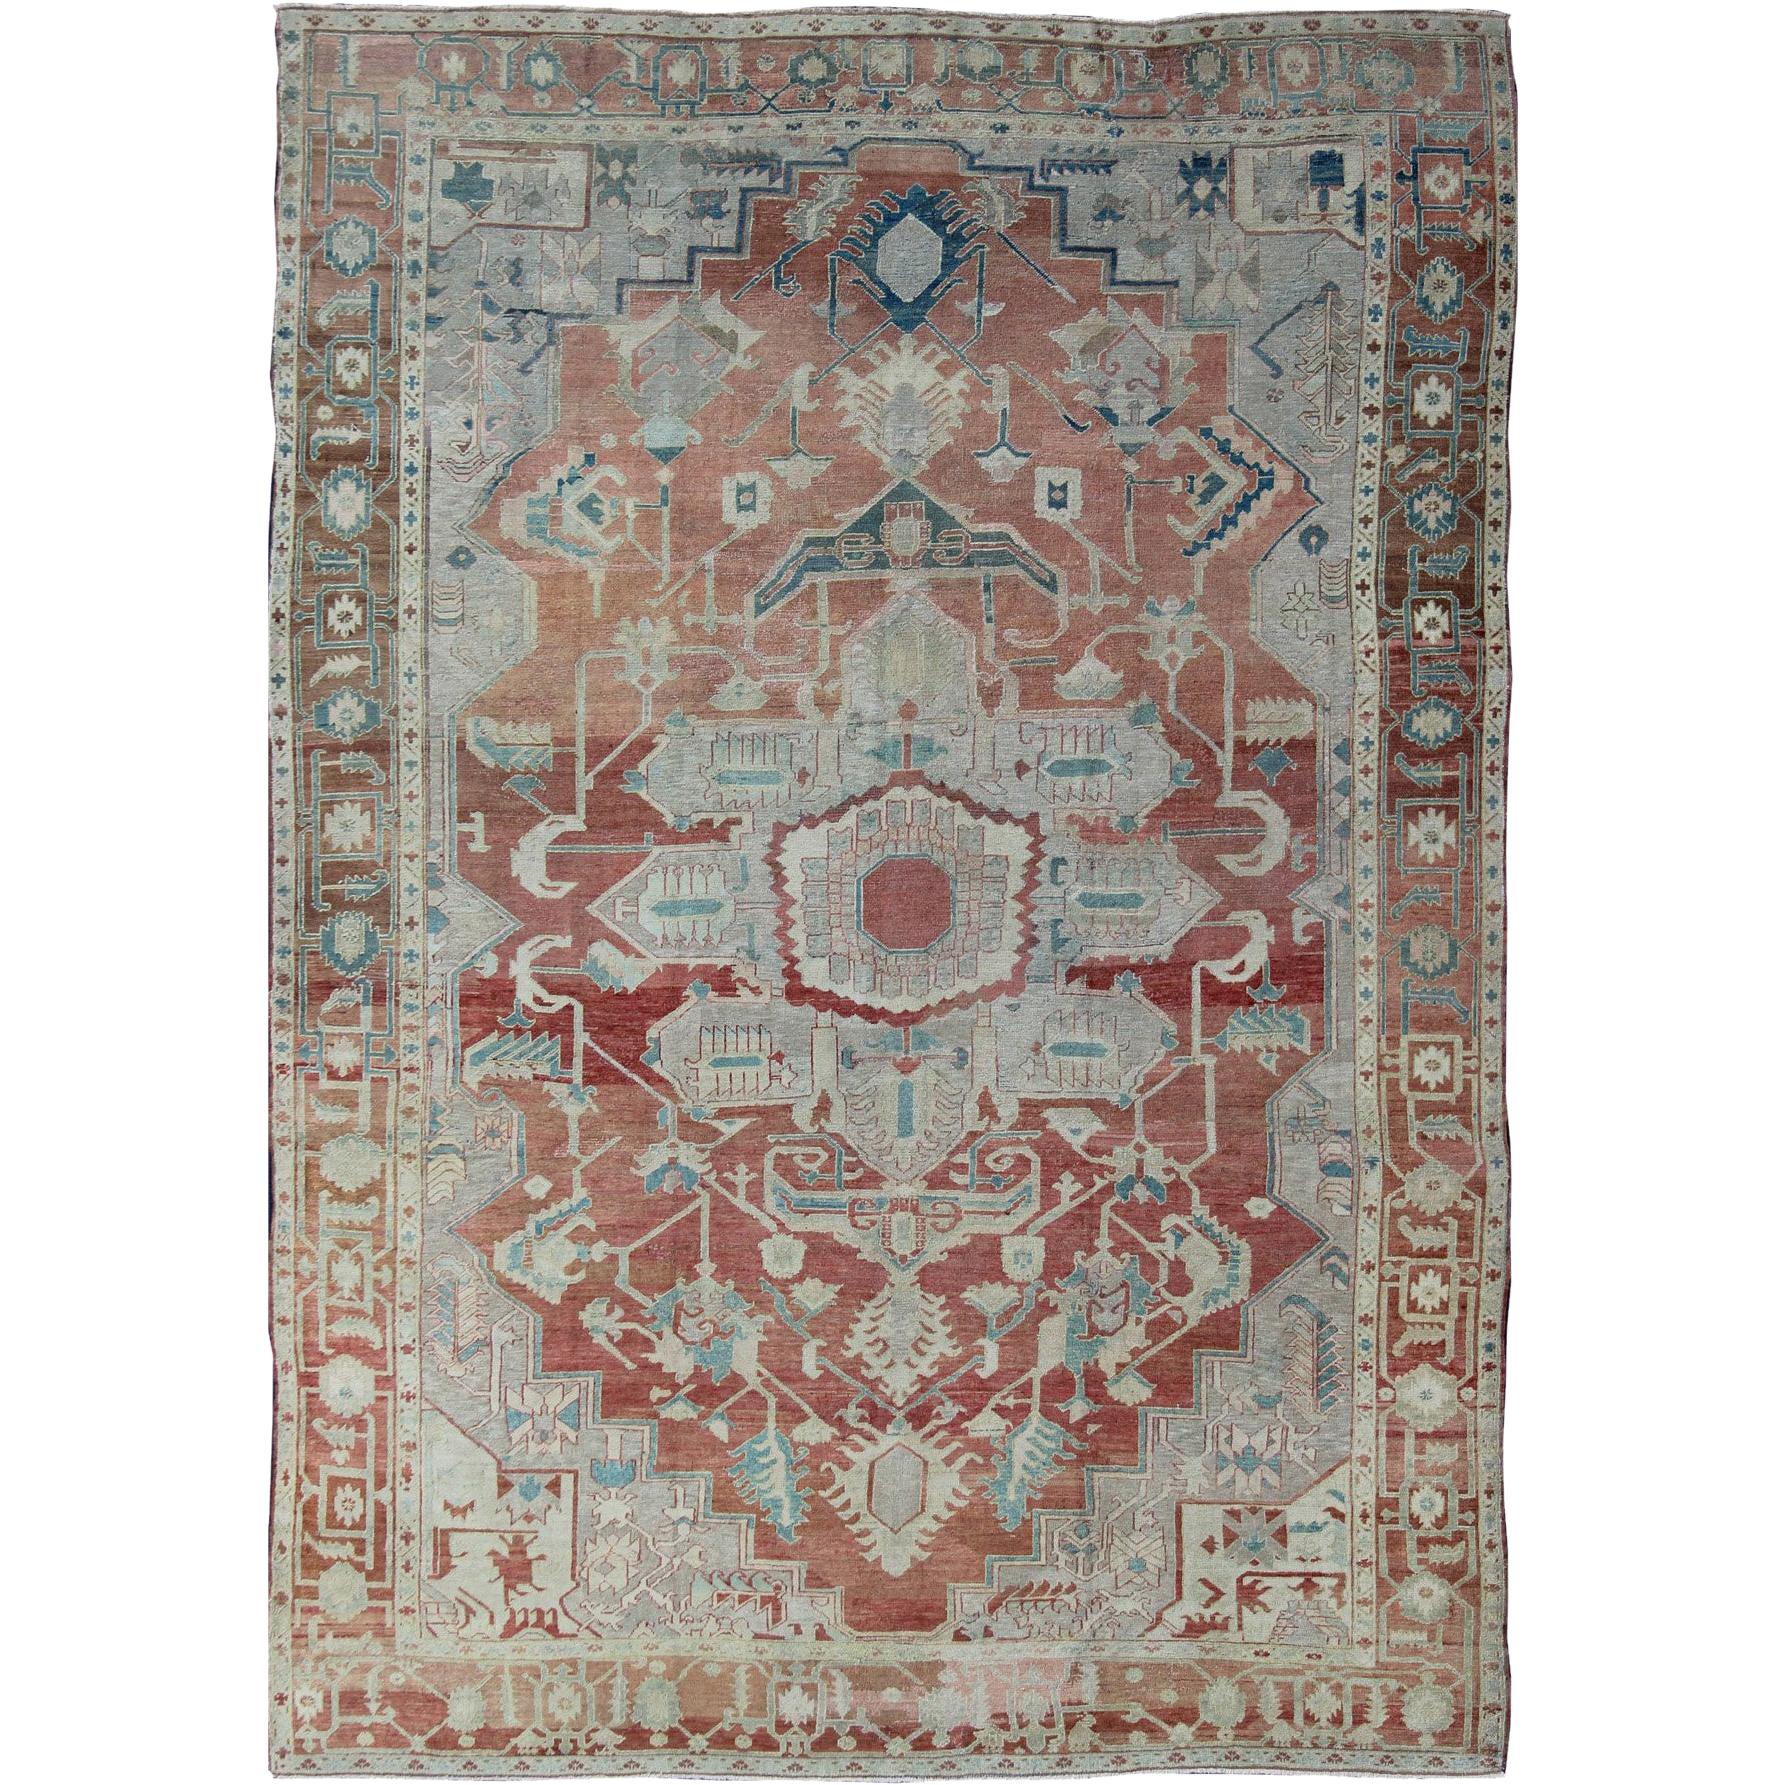 Antique Persian Large Serapi Rug in Soft Red, Taupe, Light Teal and Blue For Sale